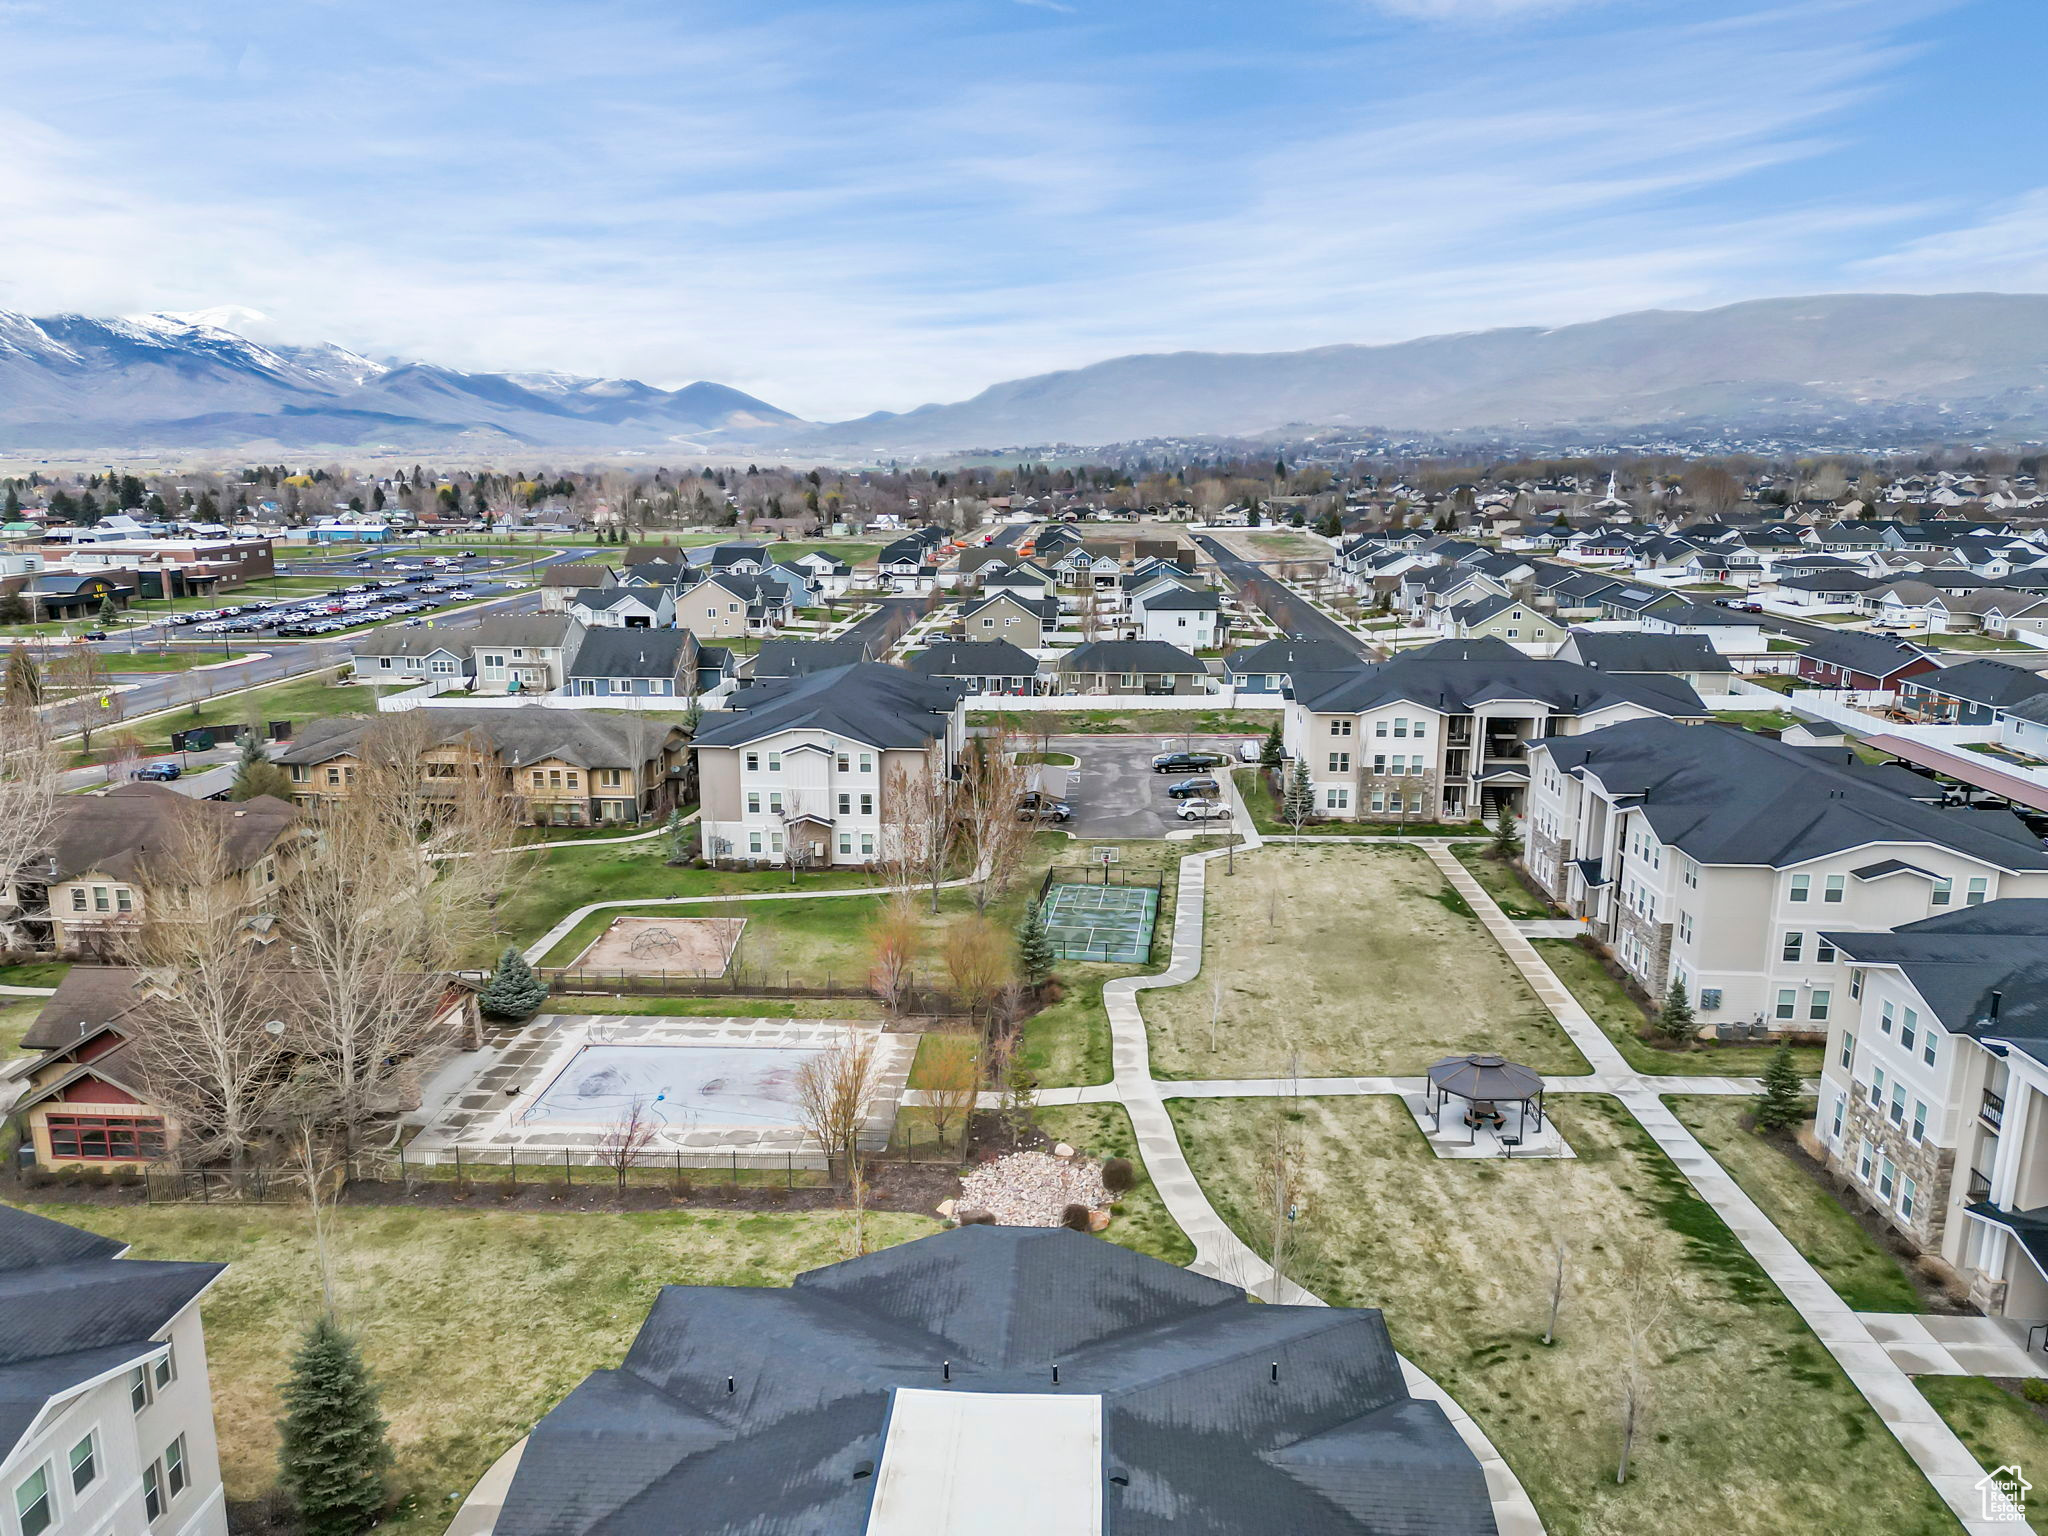 1051 S 500 E #E101, Heber City, Utah 84032, 3 Bedrooms Bedrooms, 10 Rooms Rooms,2 BathroomsBathrooms,Residential,For sale,500,1993255